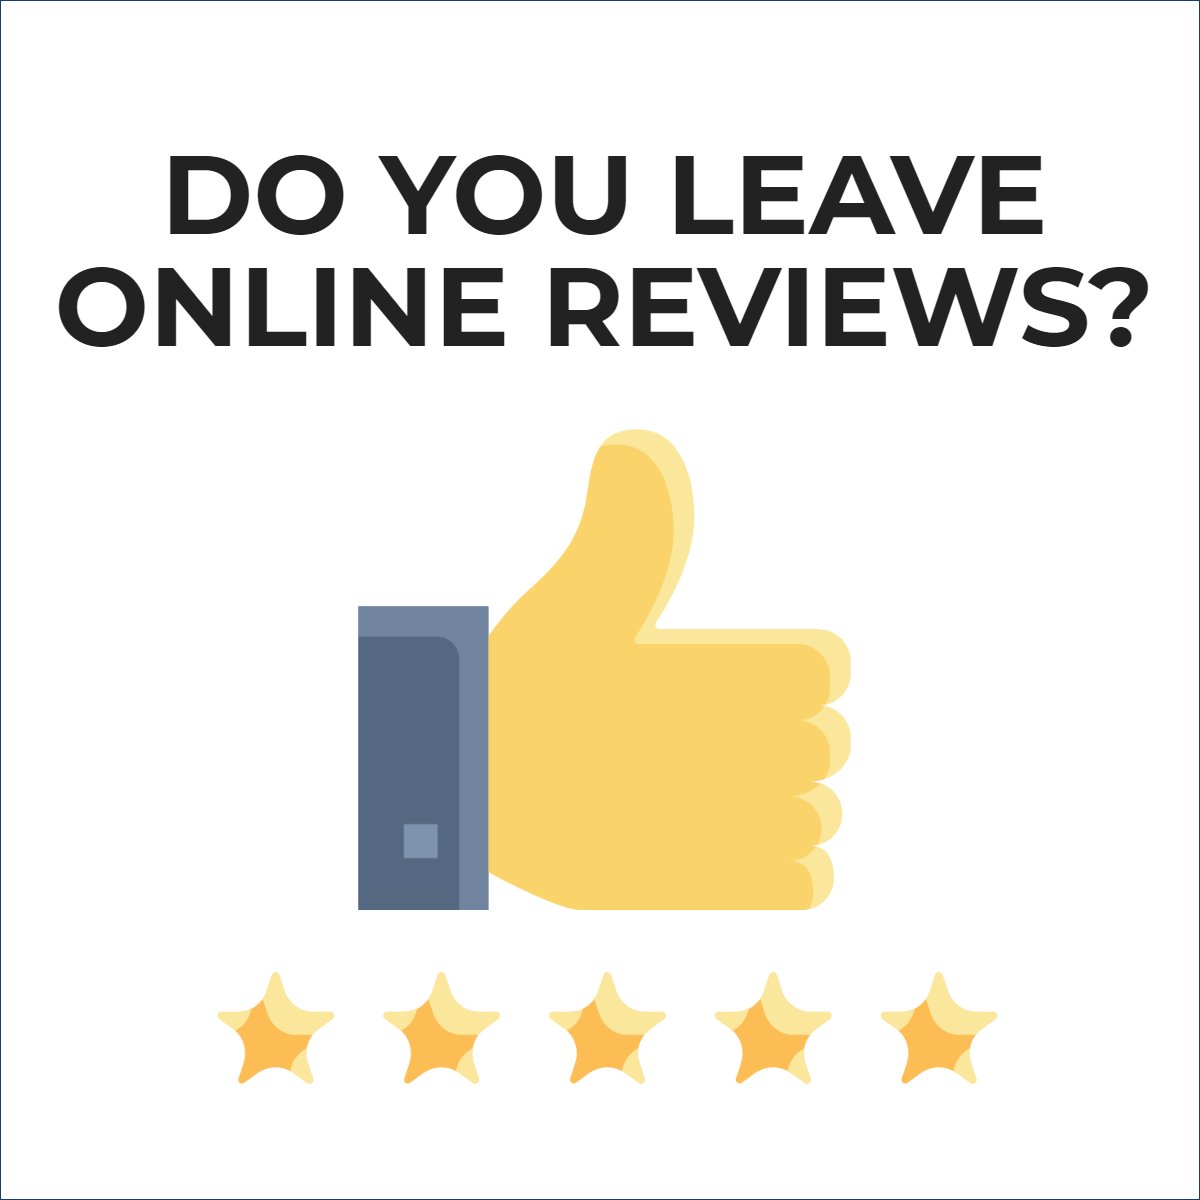 Did you know that 90% of consumers read online reviews before visiting a business? 😉

#onlinereviews #onlinereviewsmatter #realestate #realestatecoach #digitalmarketing #reviews #reputation 
 #marylandrealestate #realestateinvestment #HomeDecor #croftonrealtor